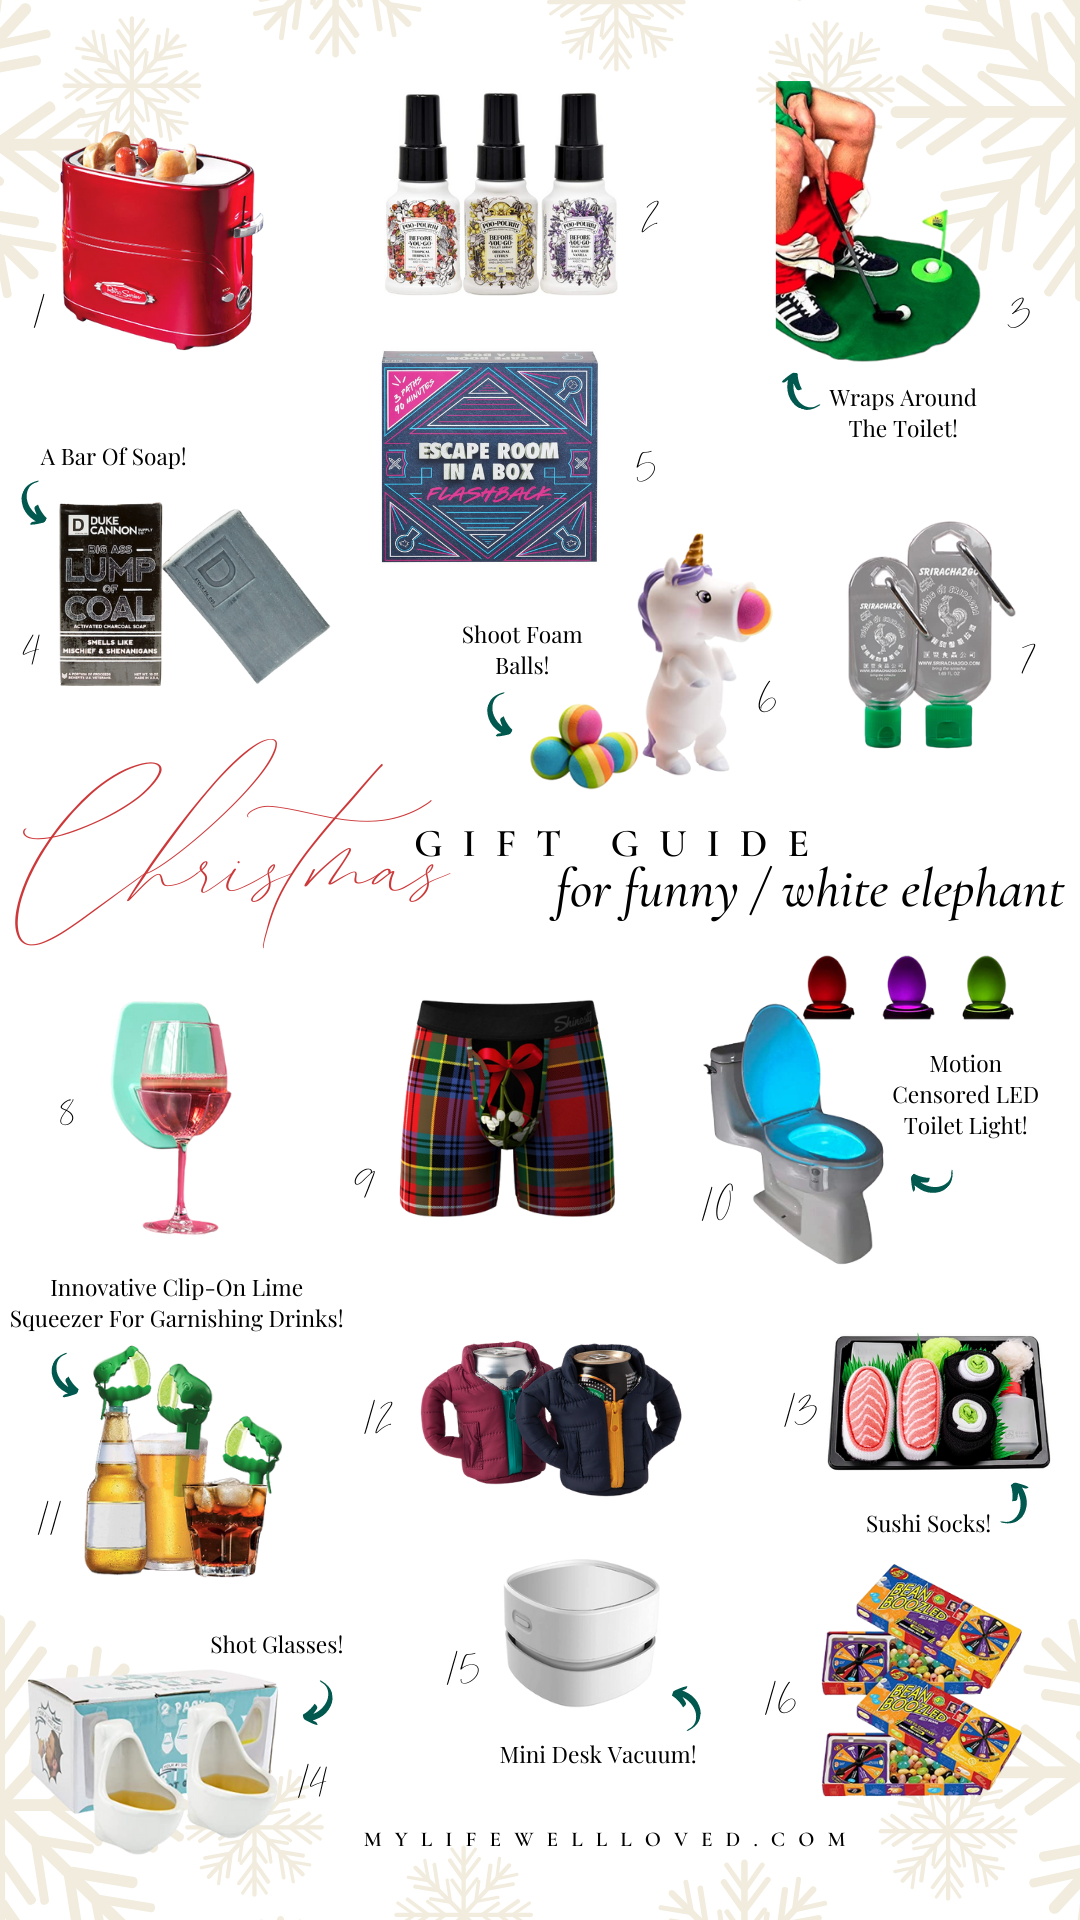 https://www.mylifewellloved.com/wp-content/uploads/White-elephant-gift-guide-2021.png